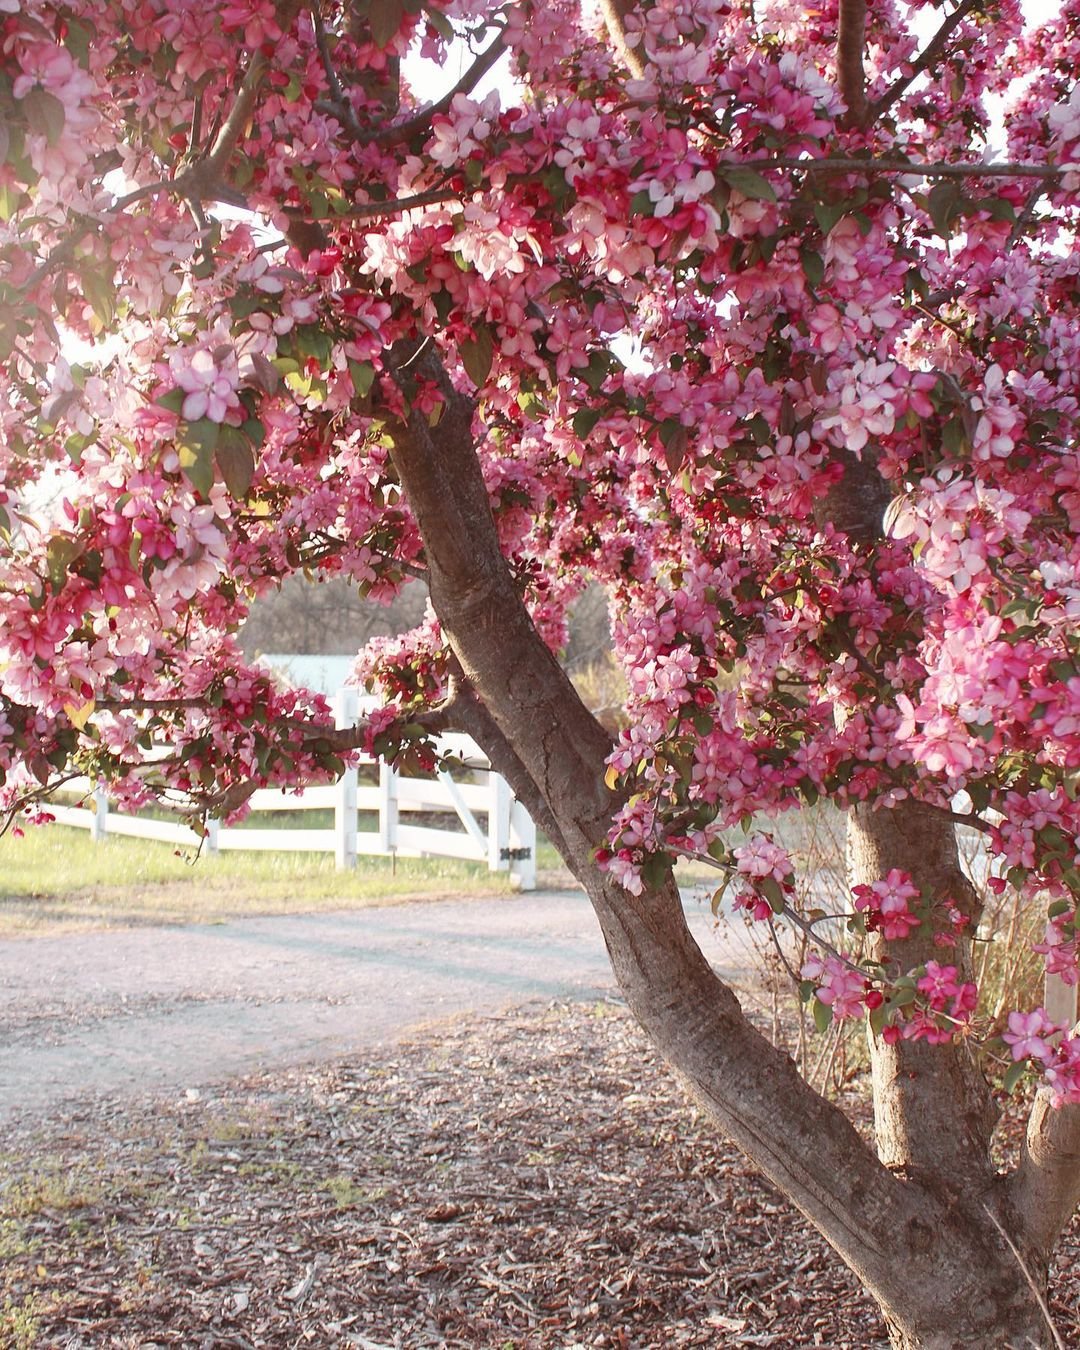 Vibrant Robinson Crabapple Tree displaying pink flowers and lush foliage in a garden.